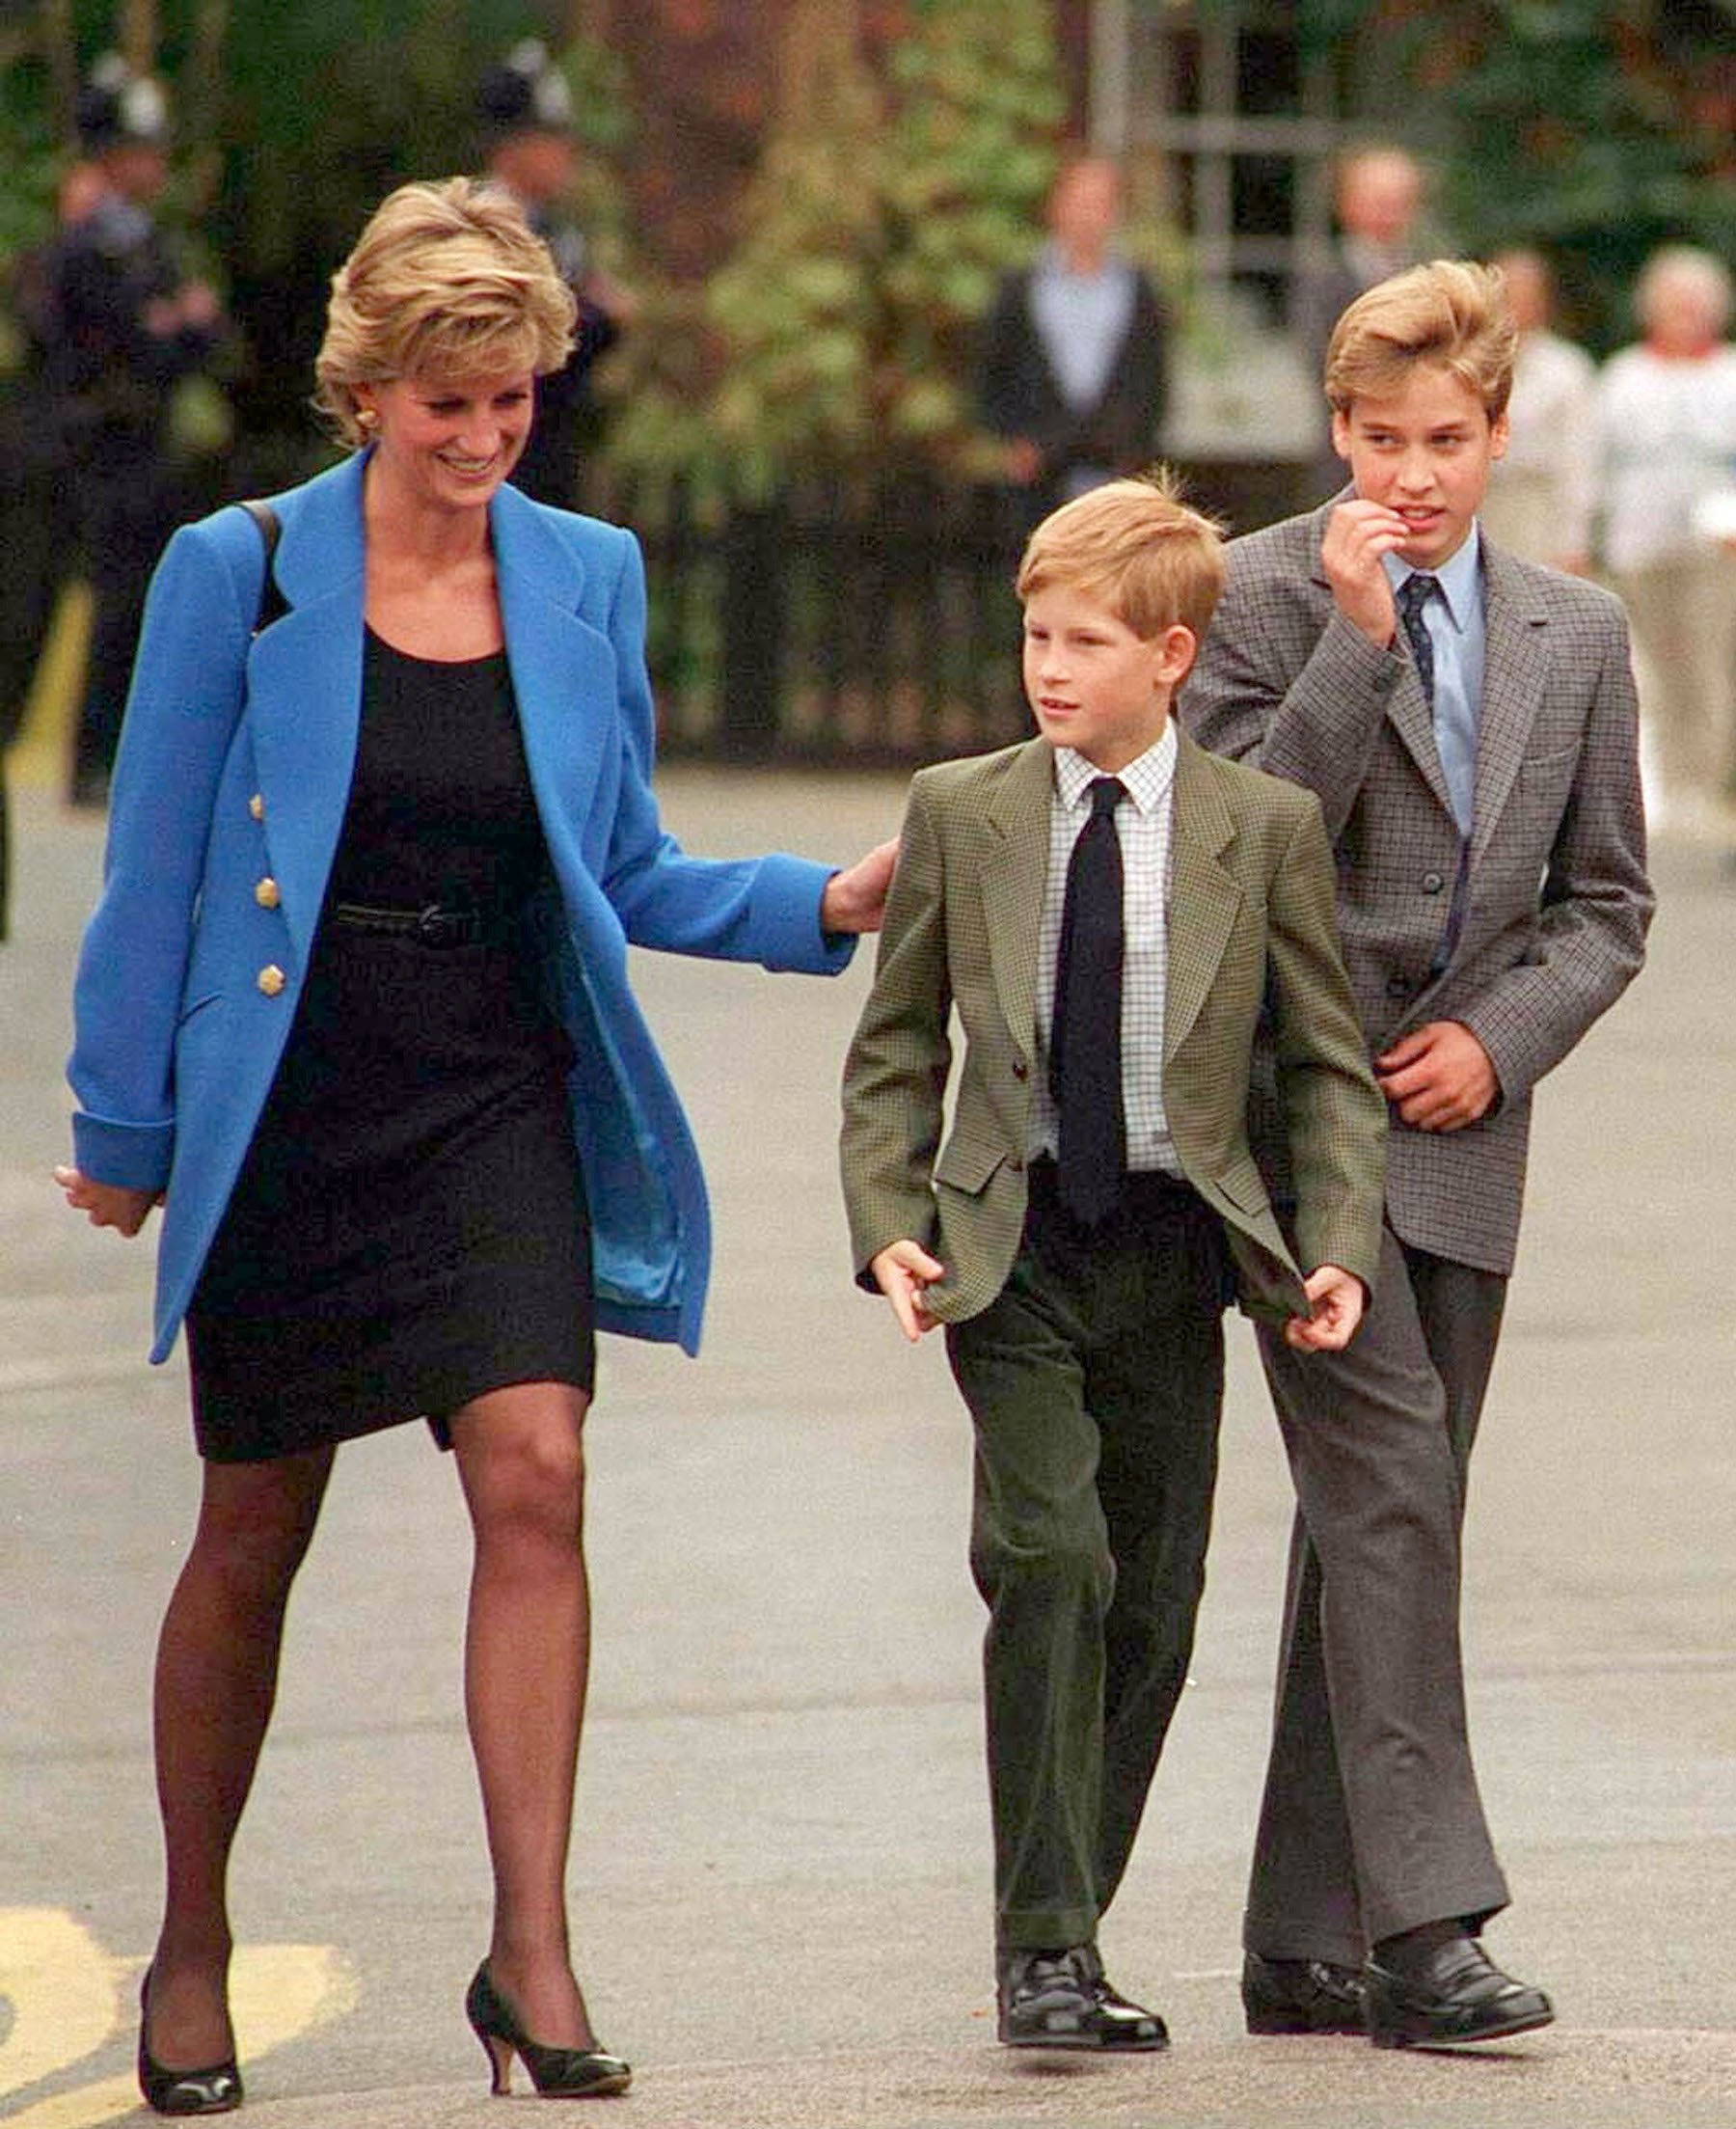 Princess Diana puts her arm on Prince Harry's shoulder while Prince William walks next to Prince Harry